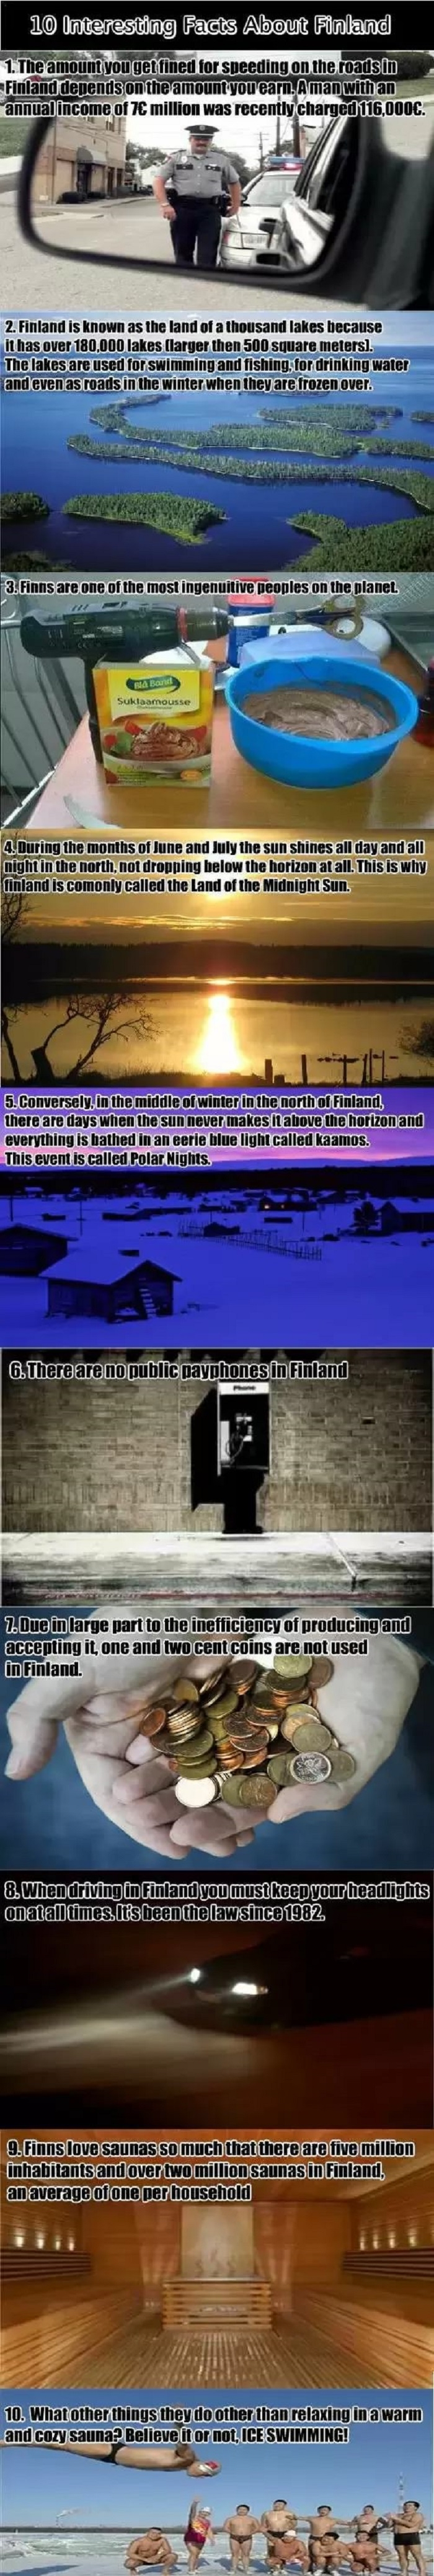 Facts about Finland